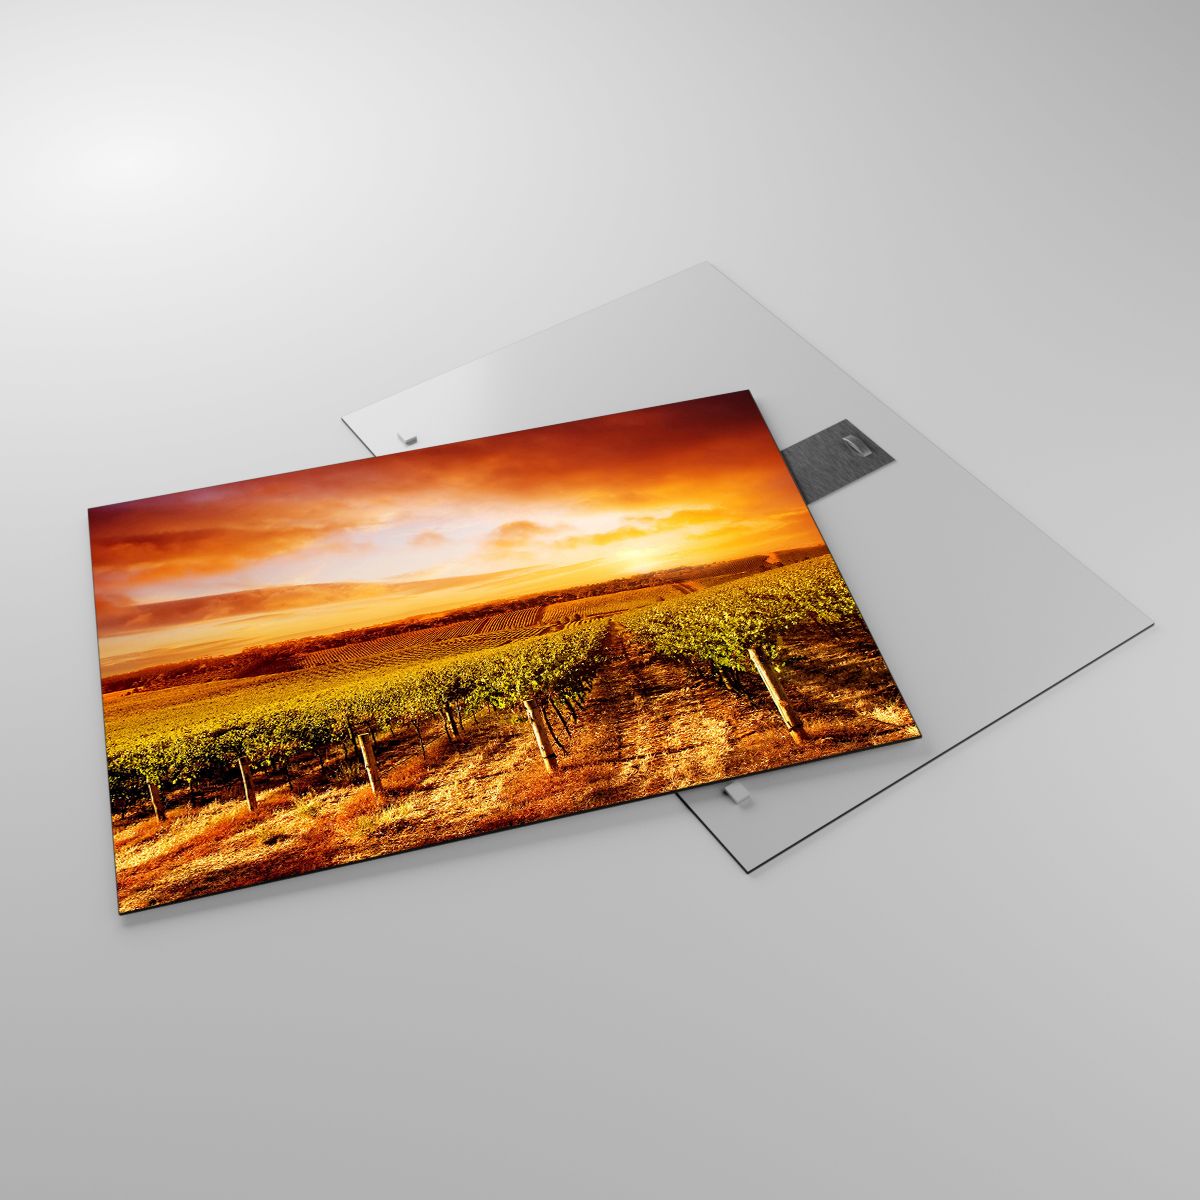 Glass picture  Vineyard, Glass picture  The Sunset, Glass picture  Landscape, Glass picture  Landscape, Glass picture  Nature